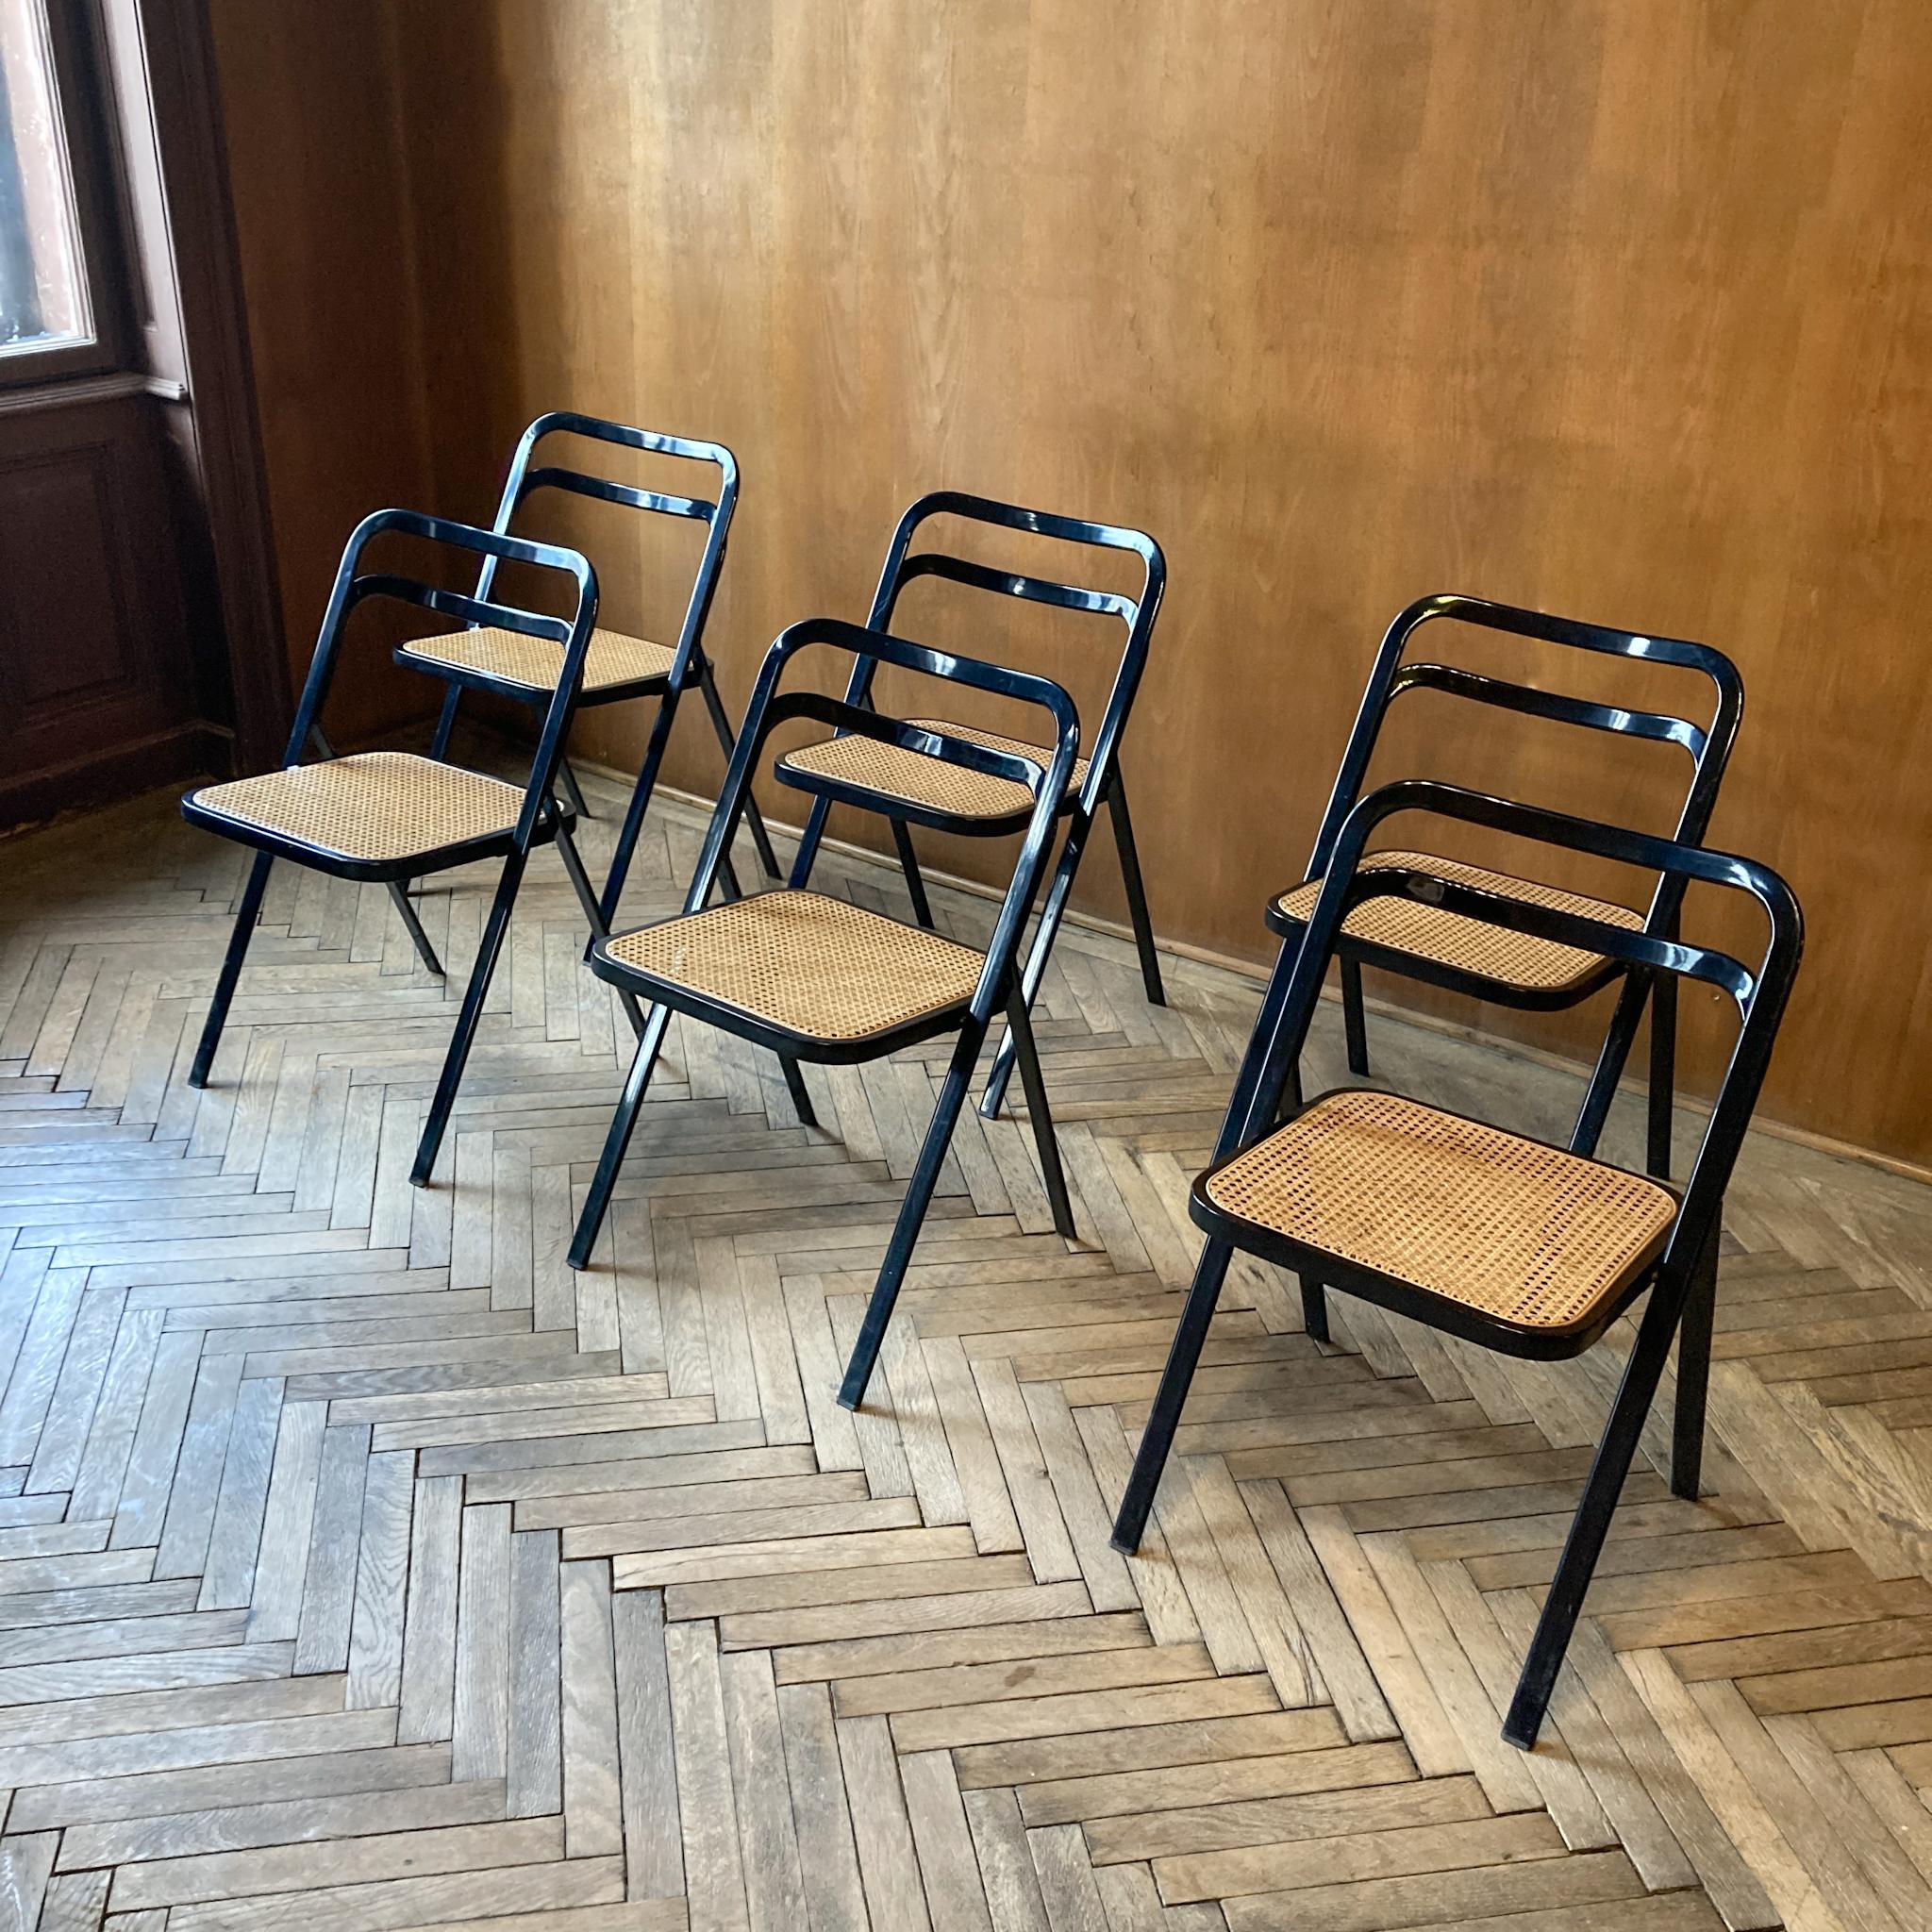 Mid-Century Modern Folding Chairs Viennese Straw by G. Cattelan, Italy 1970s.

This set of 6 folding chairs „Cidue“ by the renowned designer Giorgio Cattelan was produced in the 1970s. These chairs feature black metal frames and seats made from